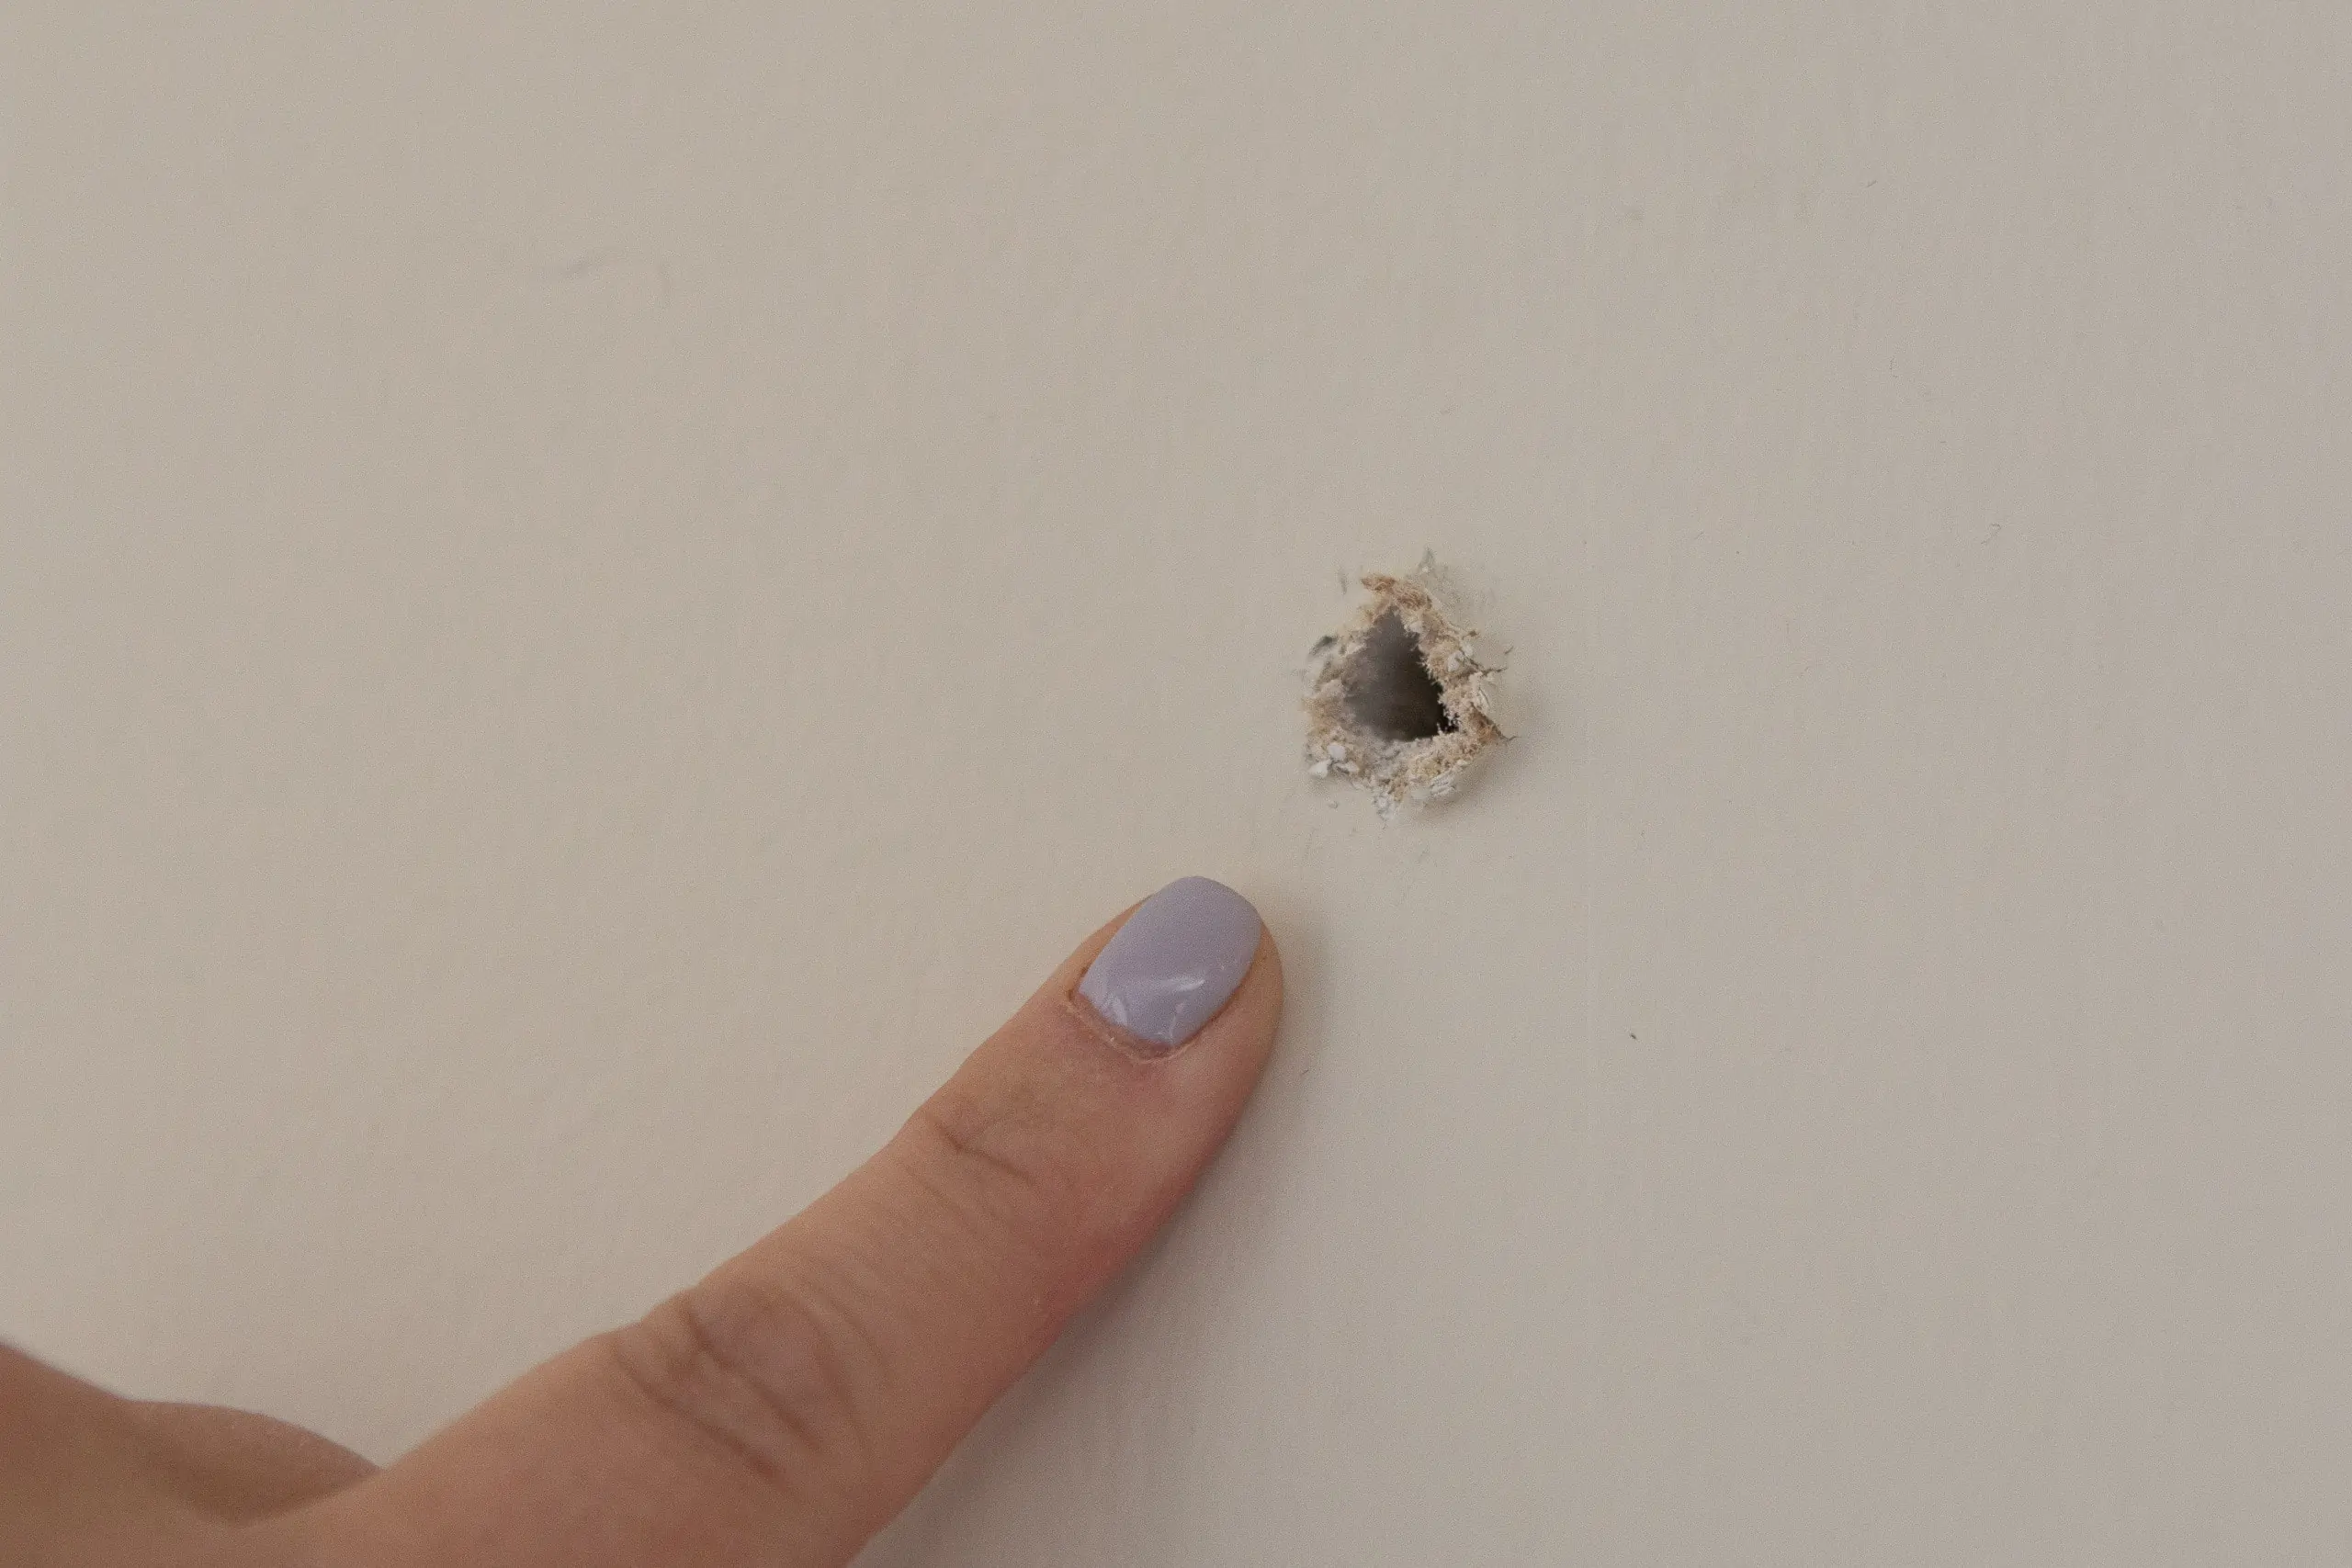 How to fix small holes in drywall